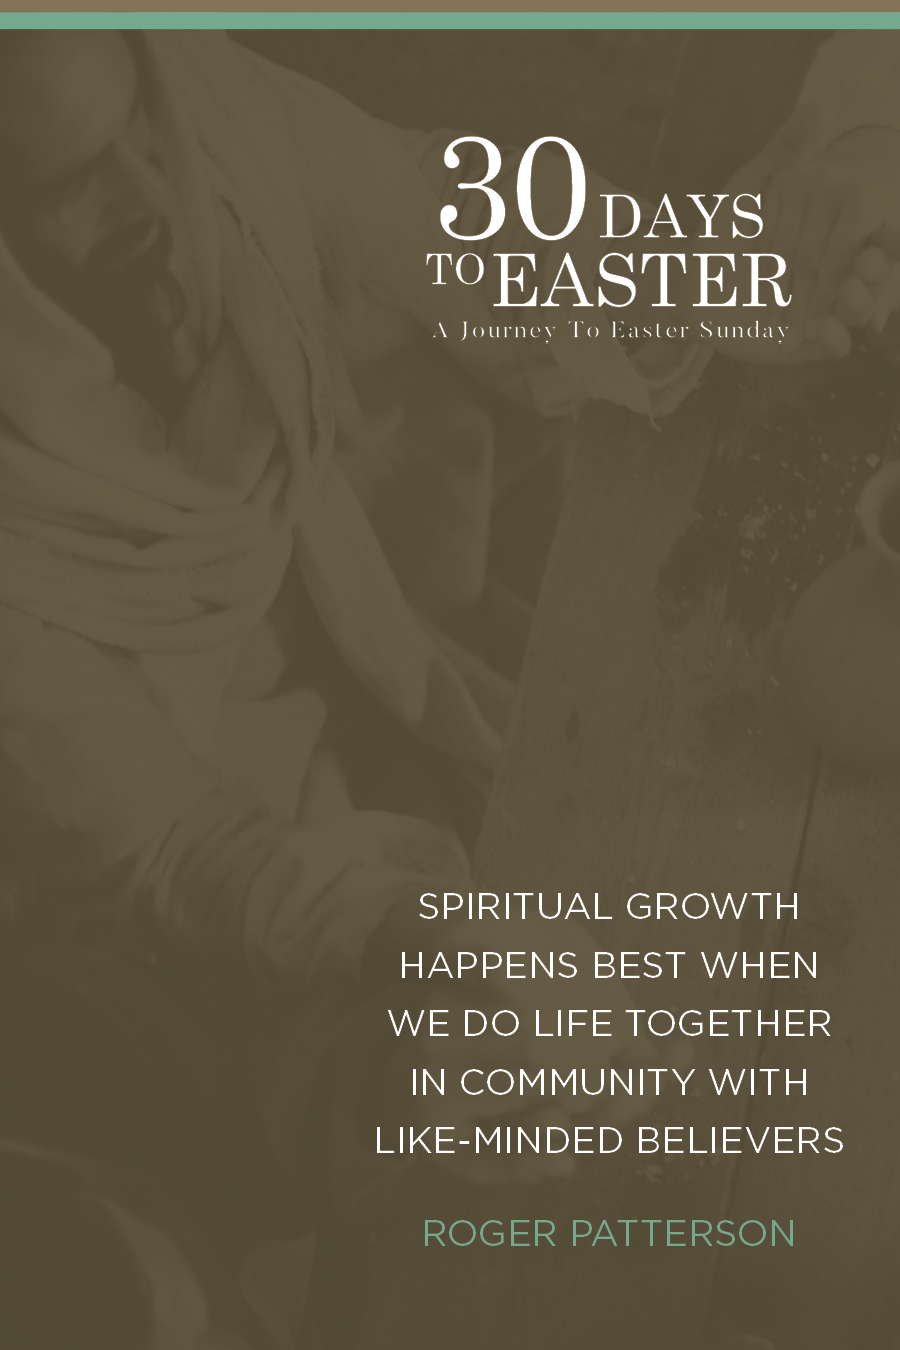 Spiritual growth happens best when we do life together in community with like-minded believers